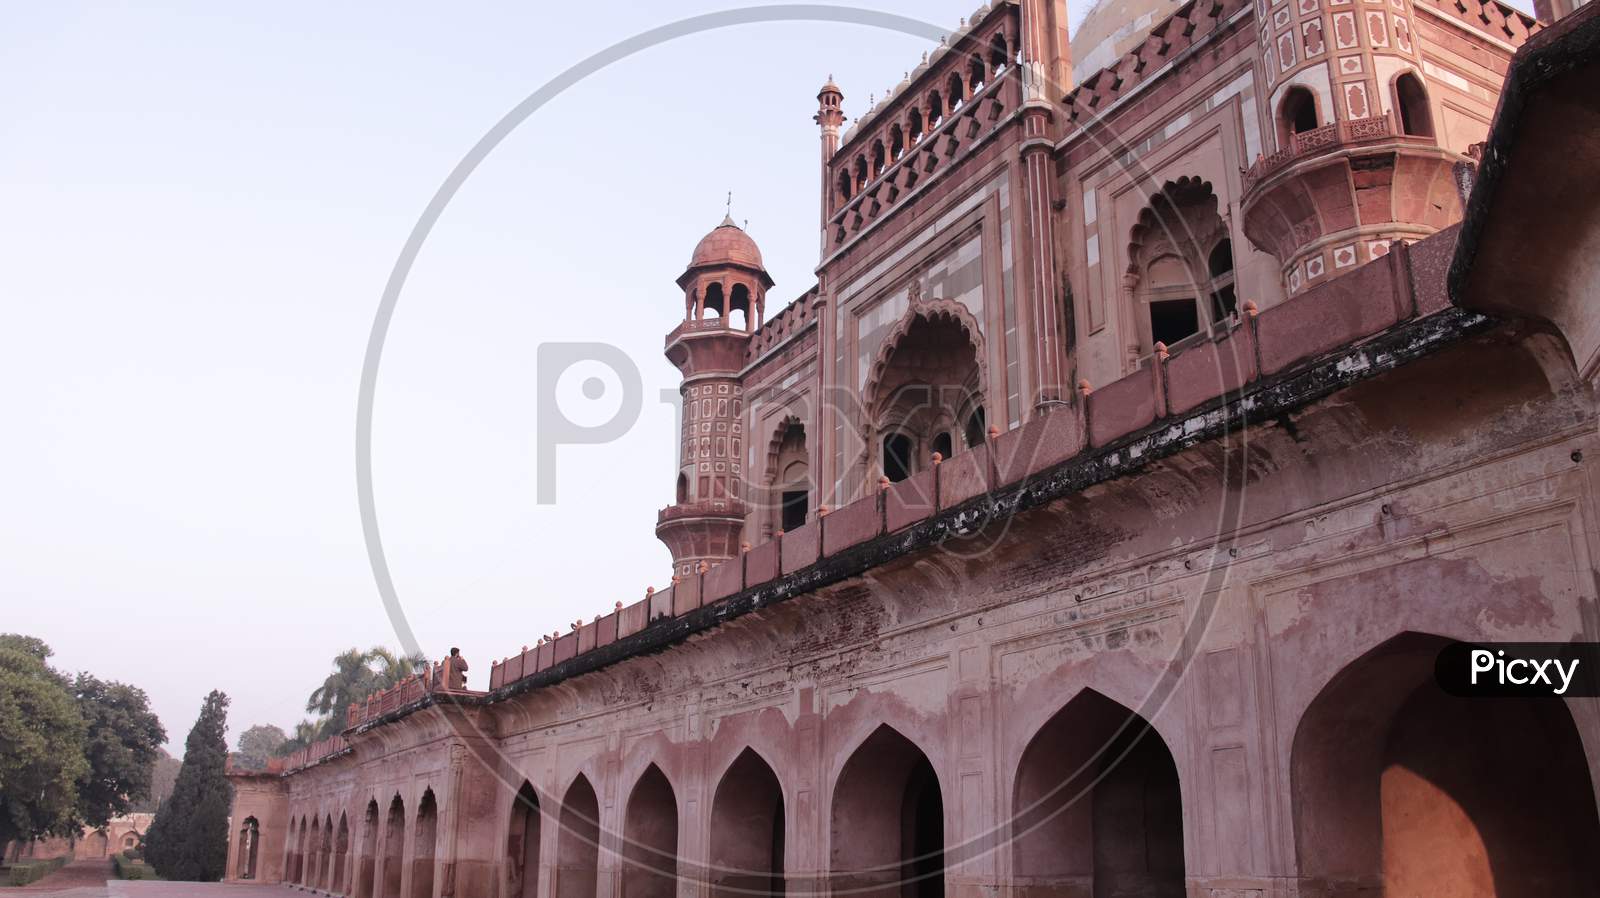 New Delhi, India – Jan 10, 2021: Safdarjung's, a popular tourist spot, was built in 1754 in the memory of Safdarjung who was the Prime Minister of India during the reign of Ahmad Shah Bahadur.